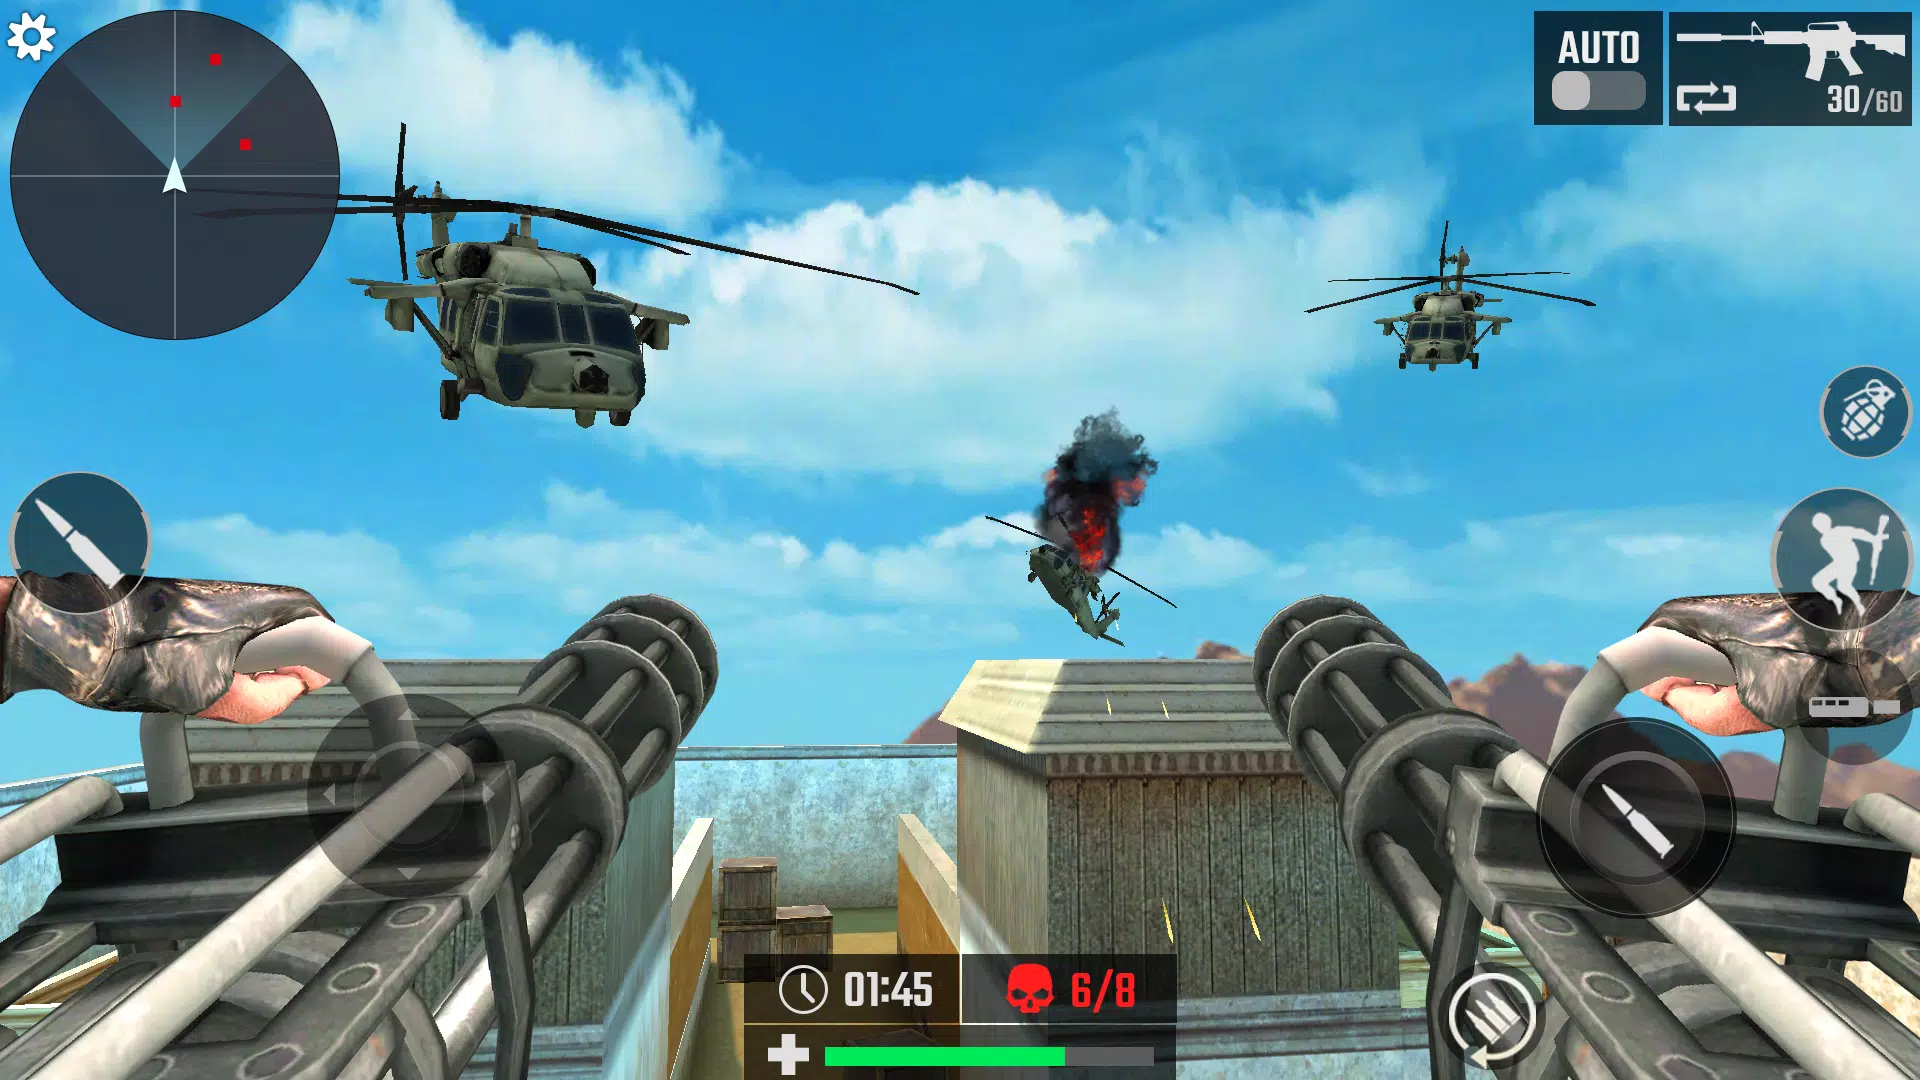 Counter Strike : FPS Mission for Android - Free App Download